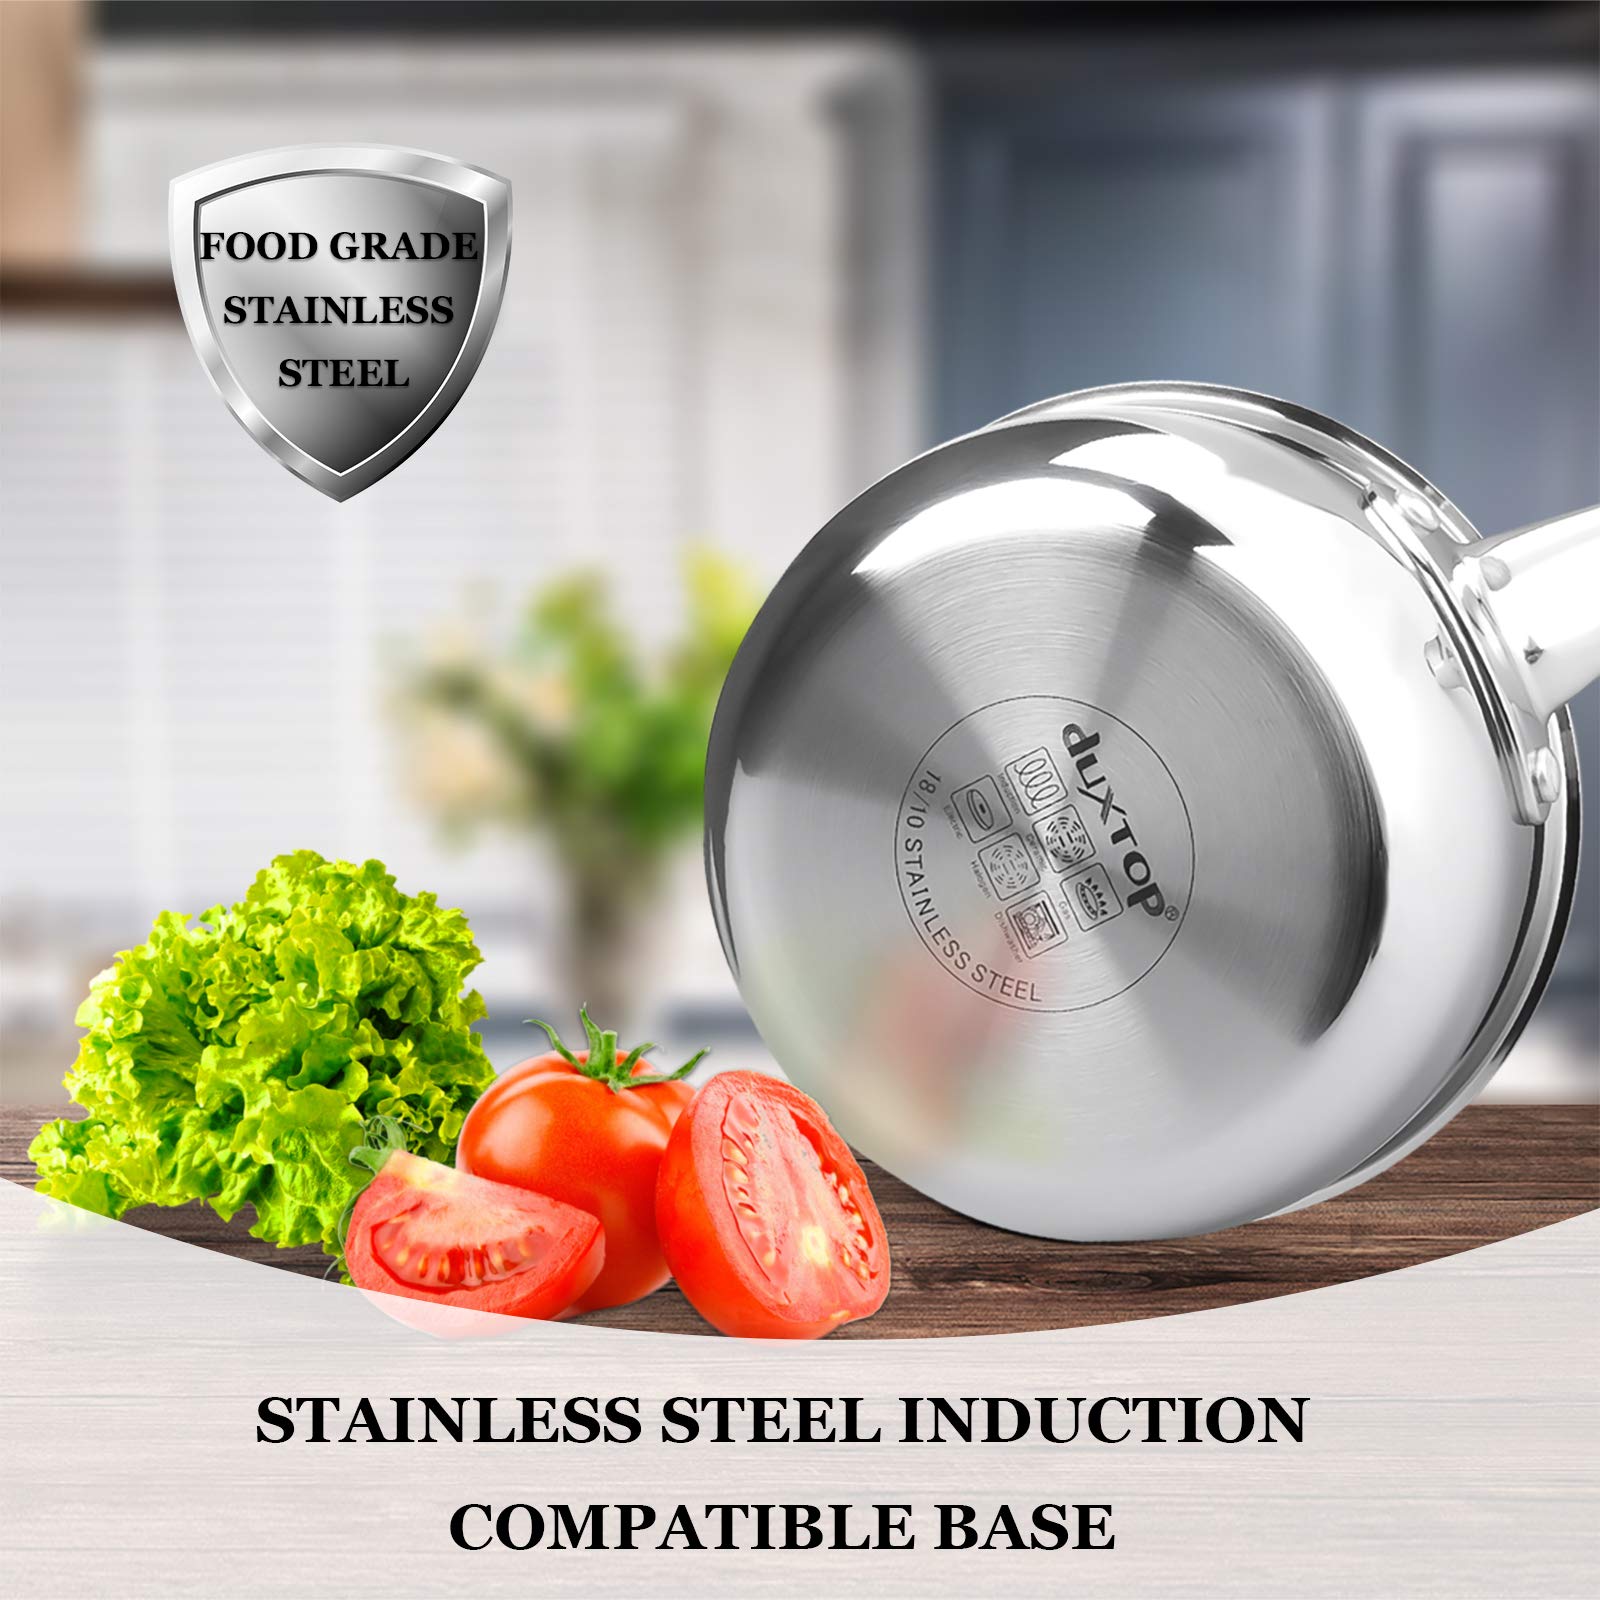 Duxtop Whole-Clad Tri-Ply Stainless Steel Saucepan with Lid, 1.6 Quart, Kitchen Induction Cookware